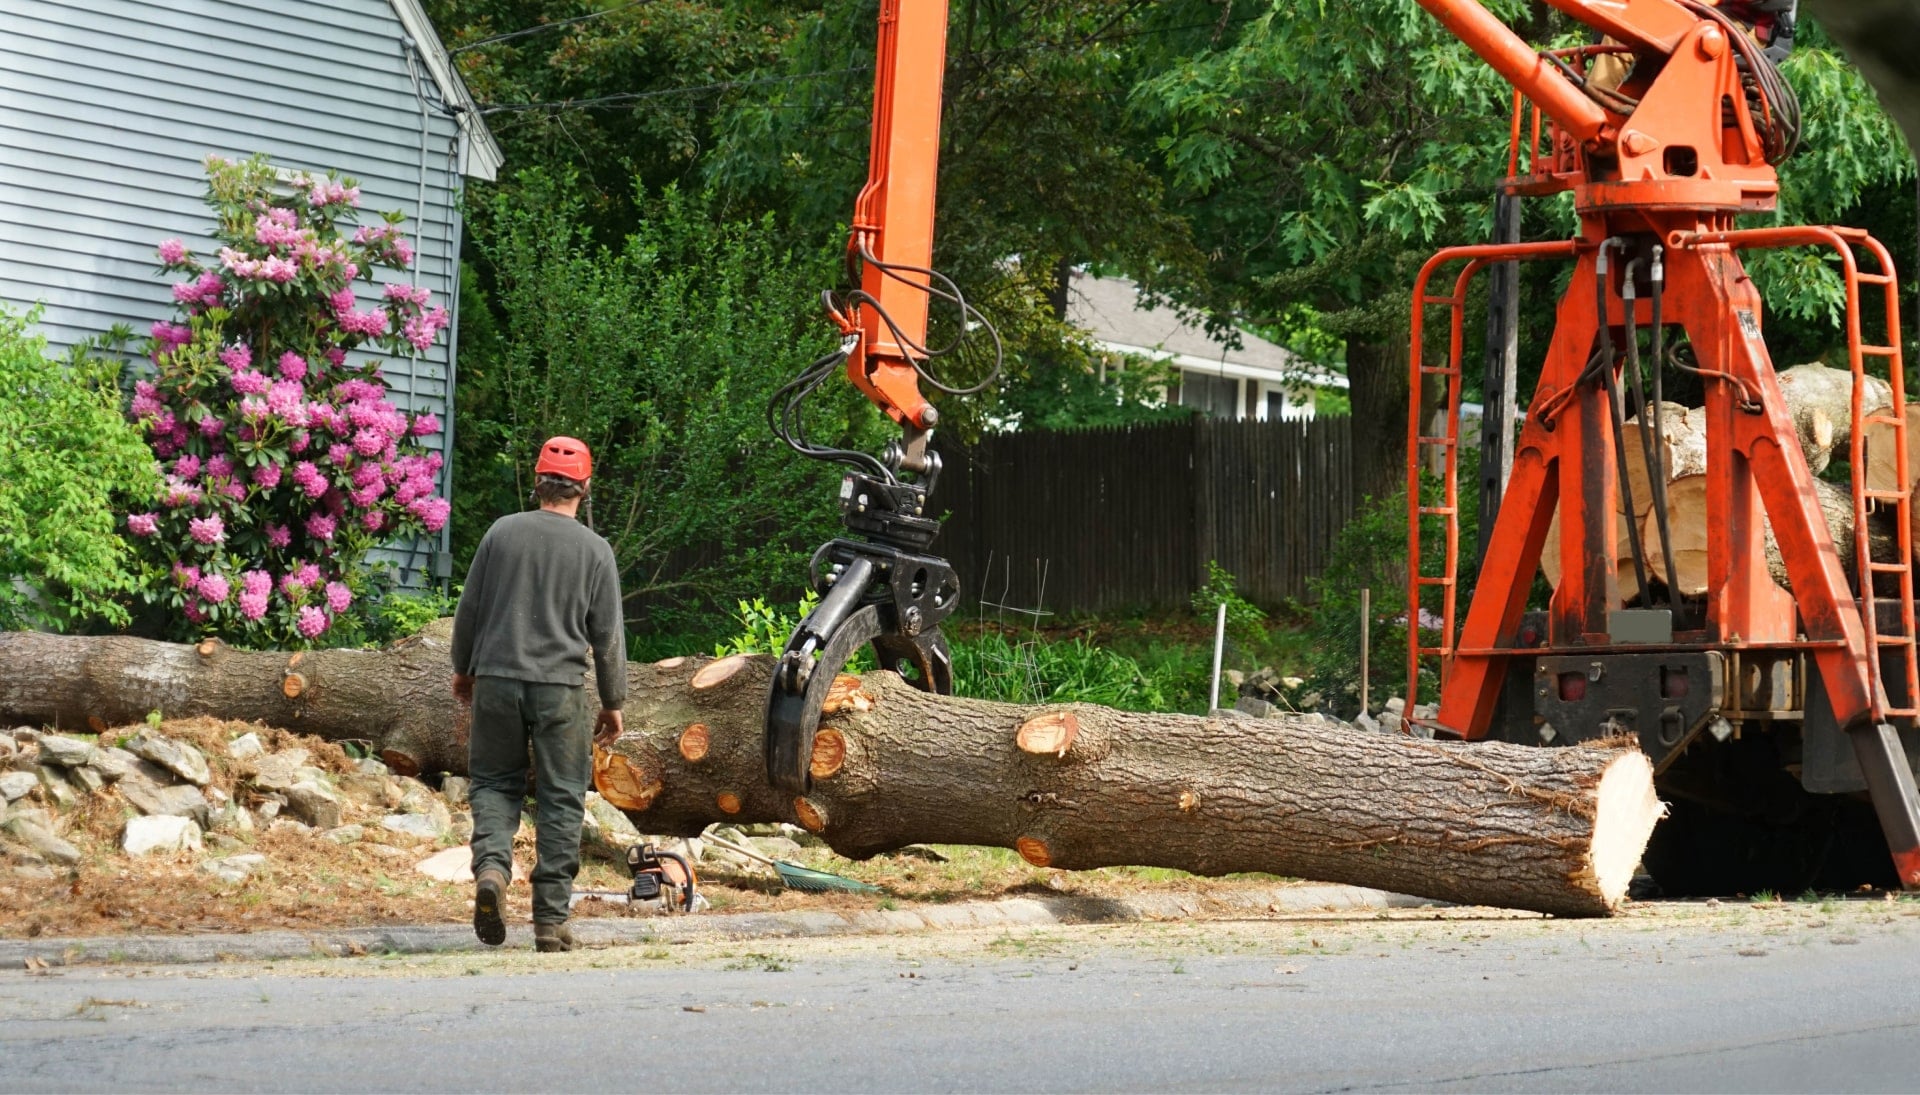 A tree stump has fallen and needs tree removal services in Austin, TX.